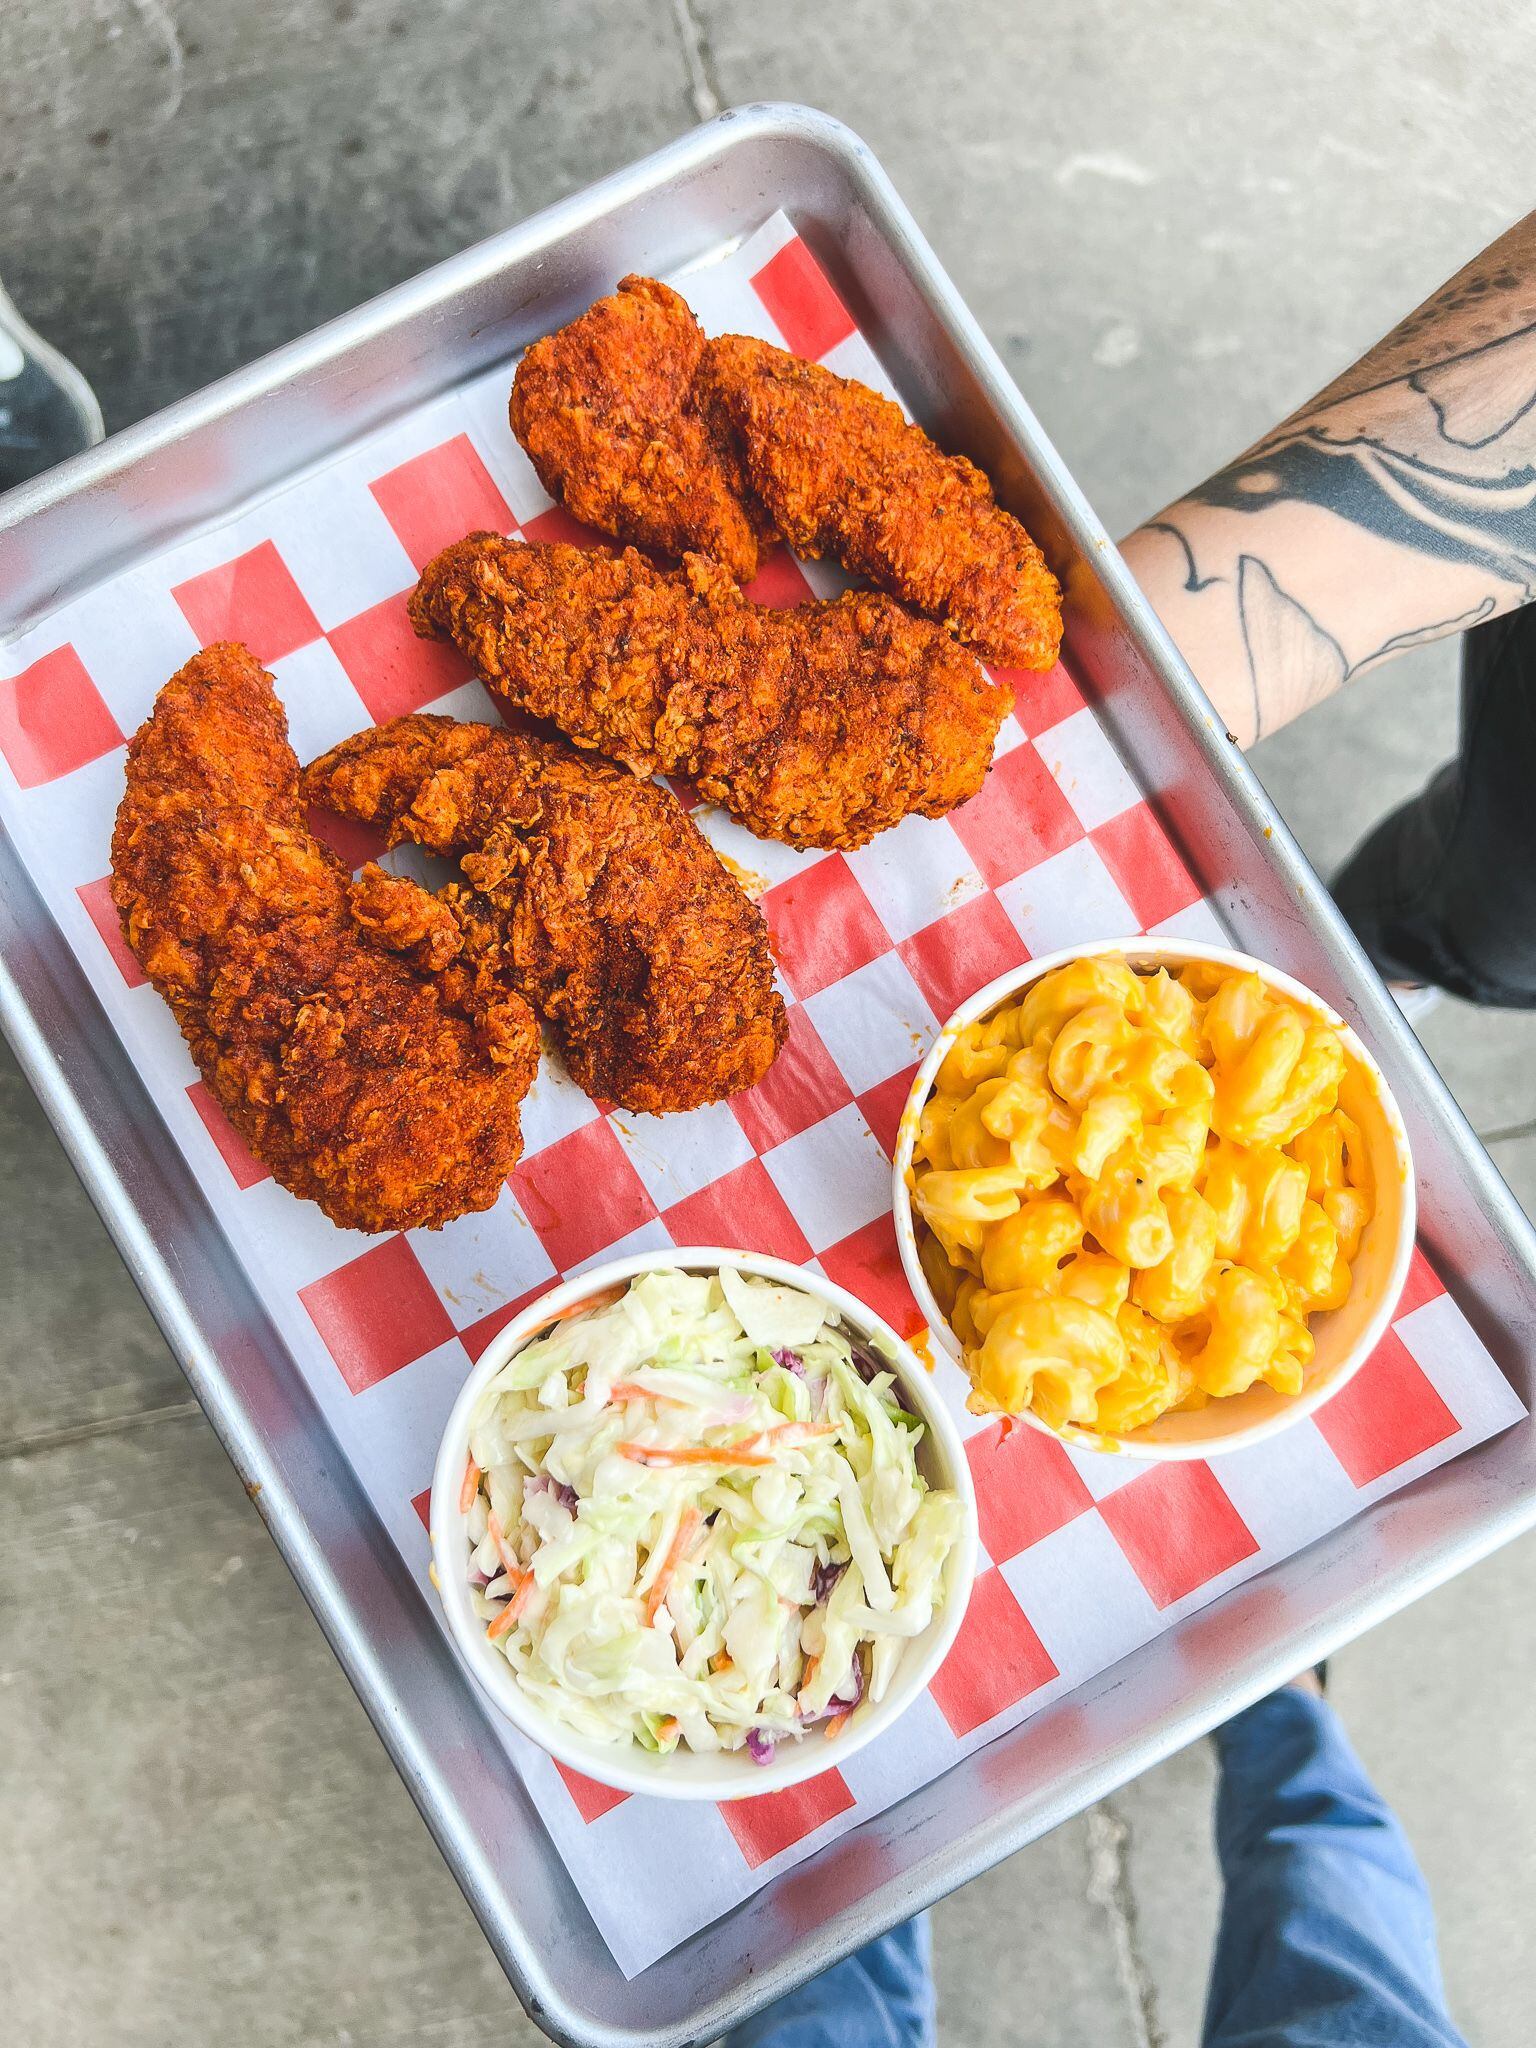 Smackbird, a concept launched by Cowboy Chicken, offers Nashville hot chicken tenders and...